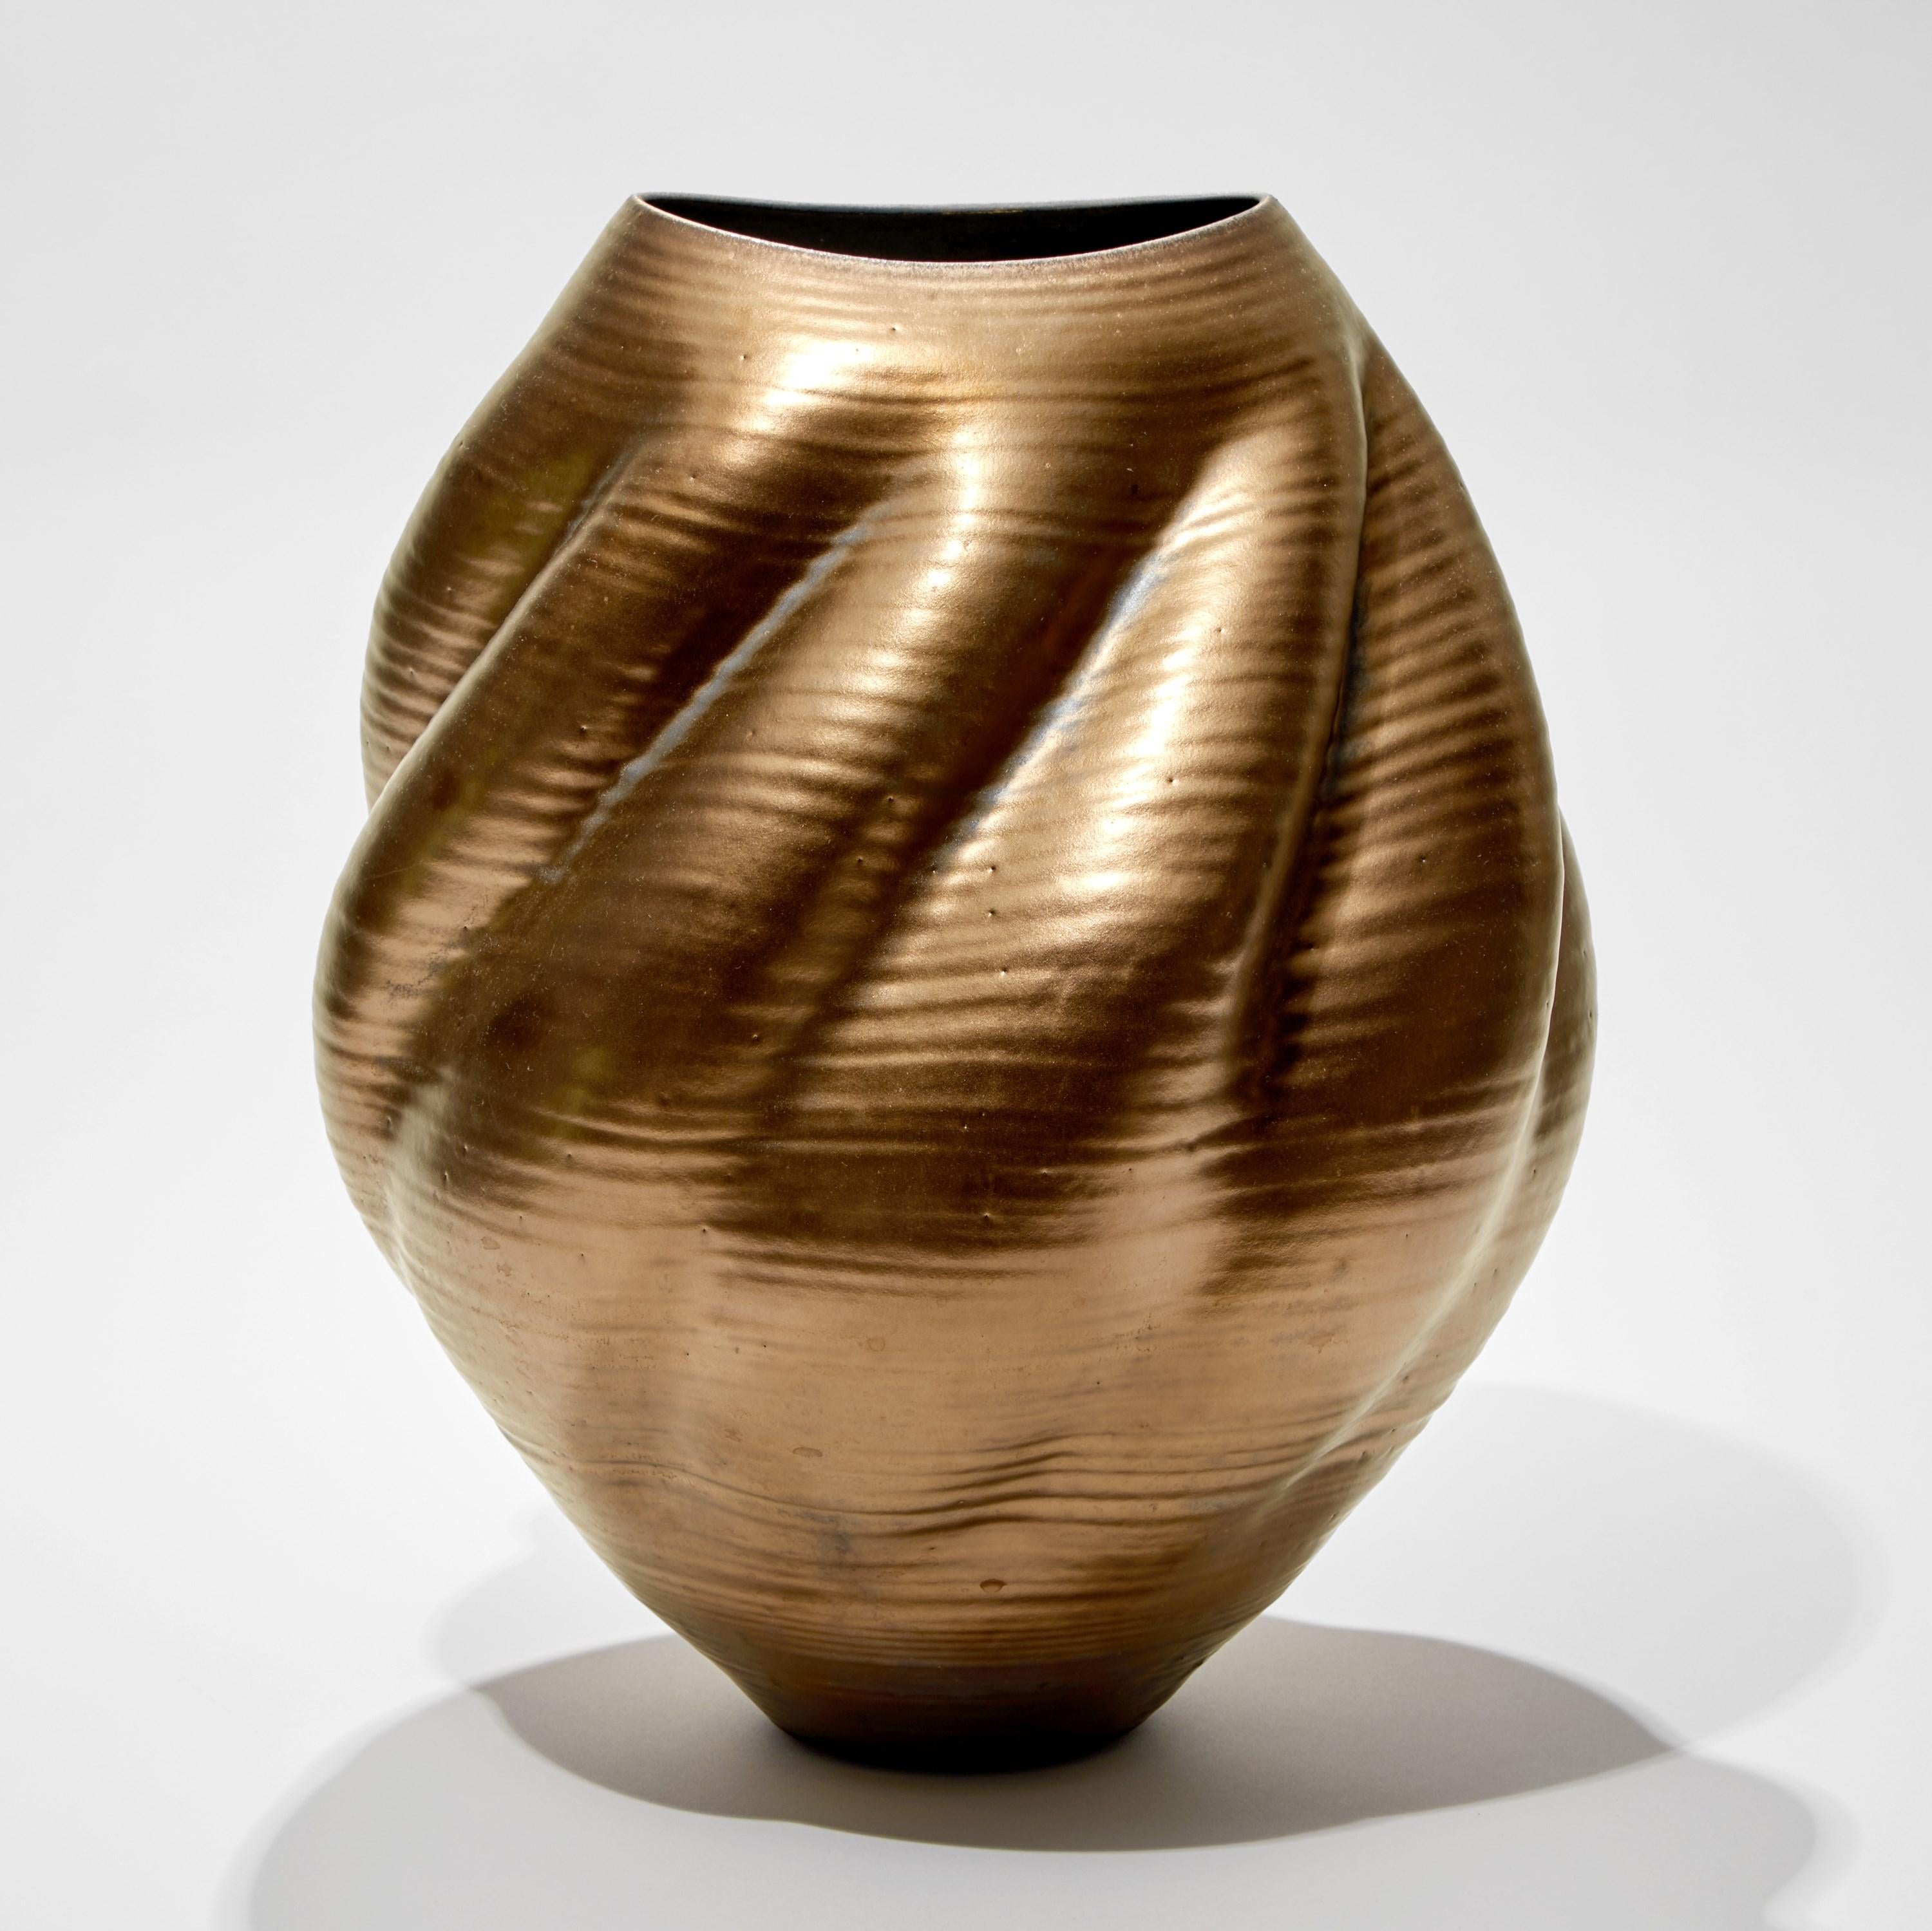 Gold Wave Form No 80 is a unique glazed ceramic sculptural vessel by the British artist, Nicholas Arroyave-Portela.

Nicholas Arroyave-Portela’s professional ceramic practice began in 1994. After 20 years based in London, he moved and set up his